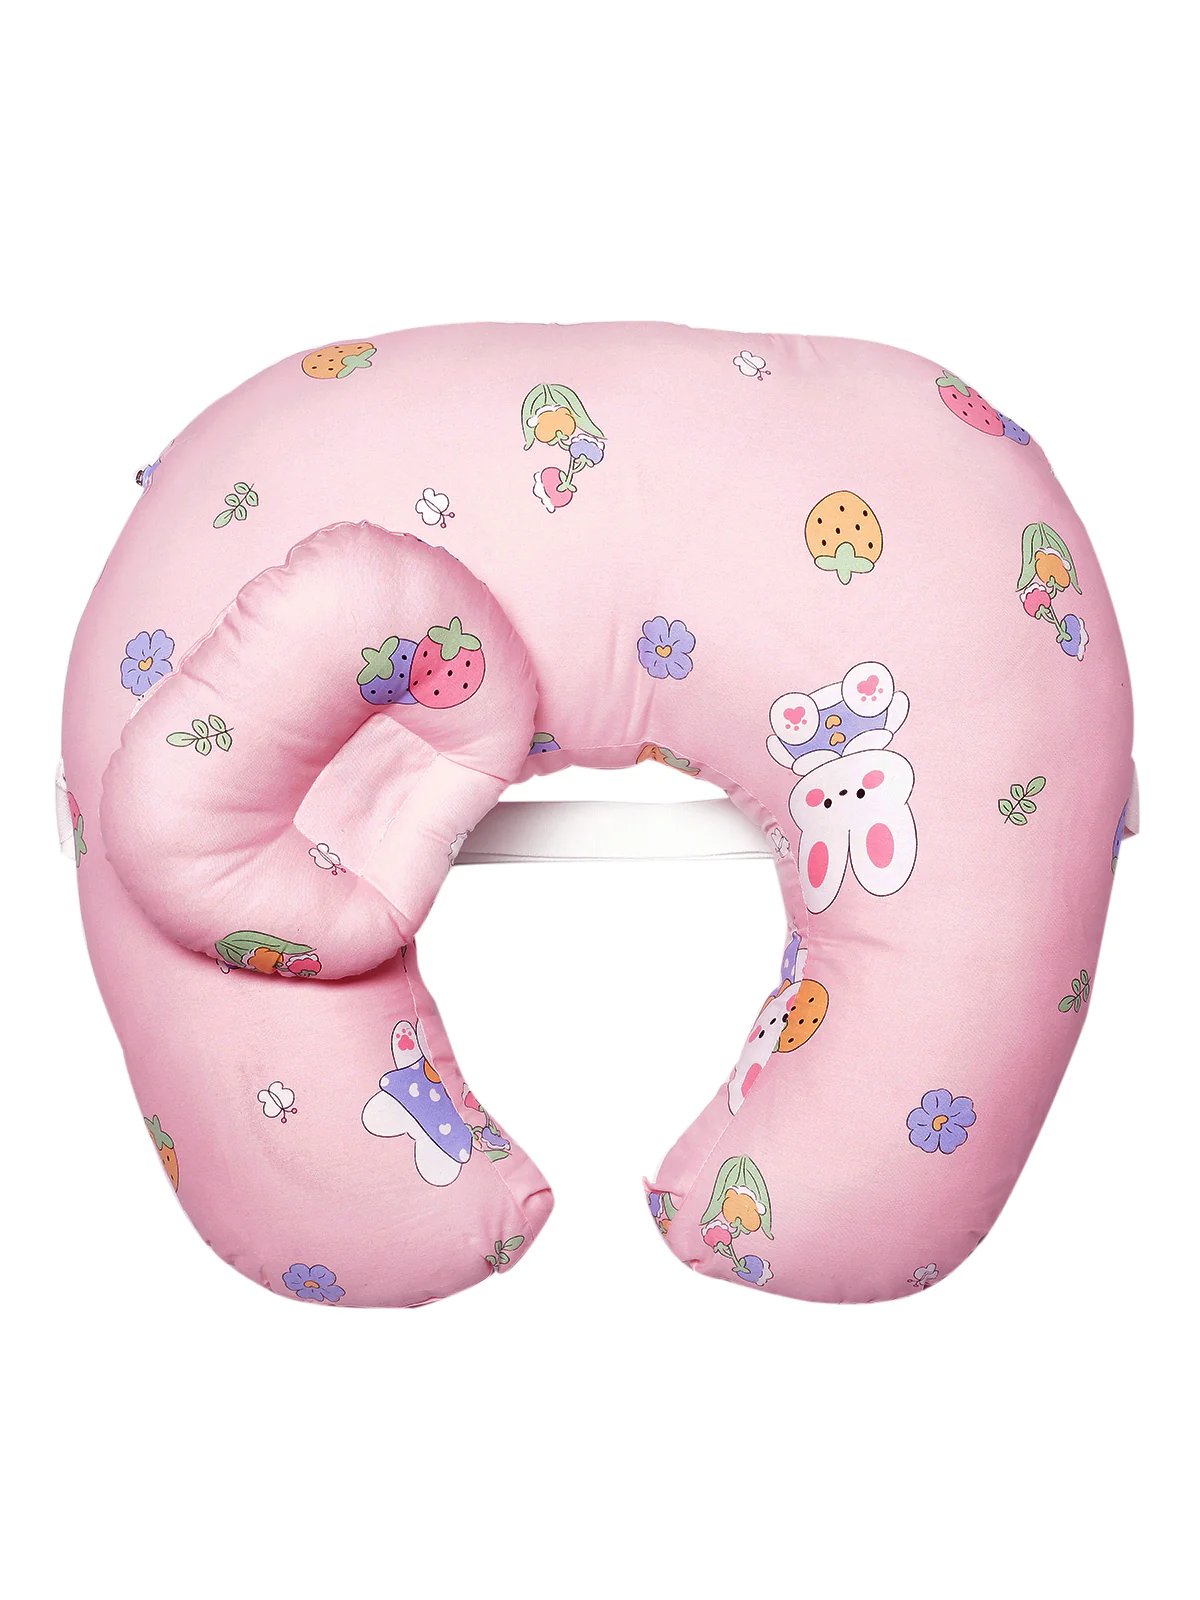 The Essential Features of an Infant Feeding Pillow